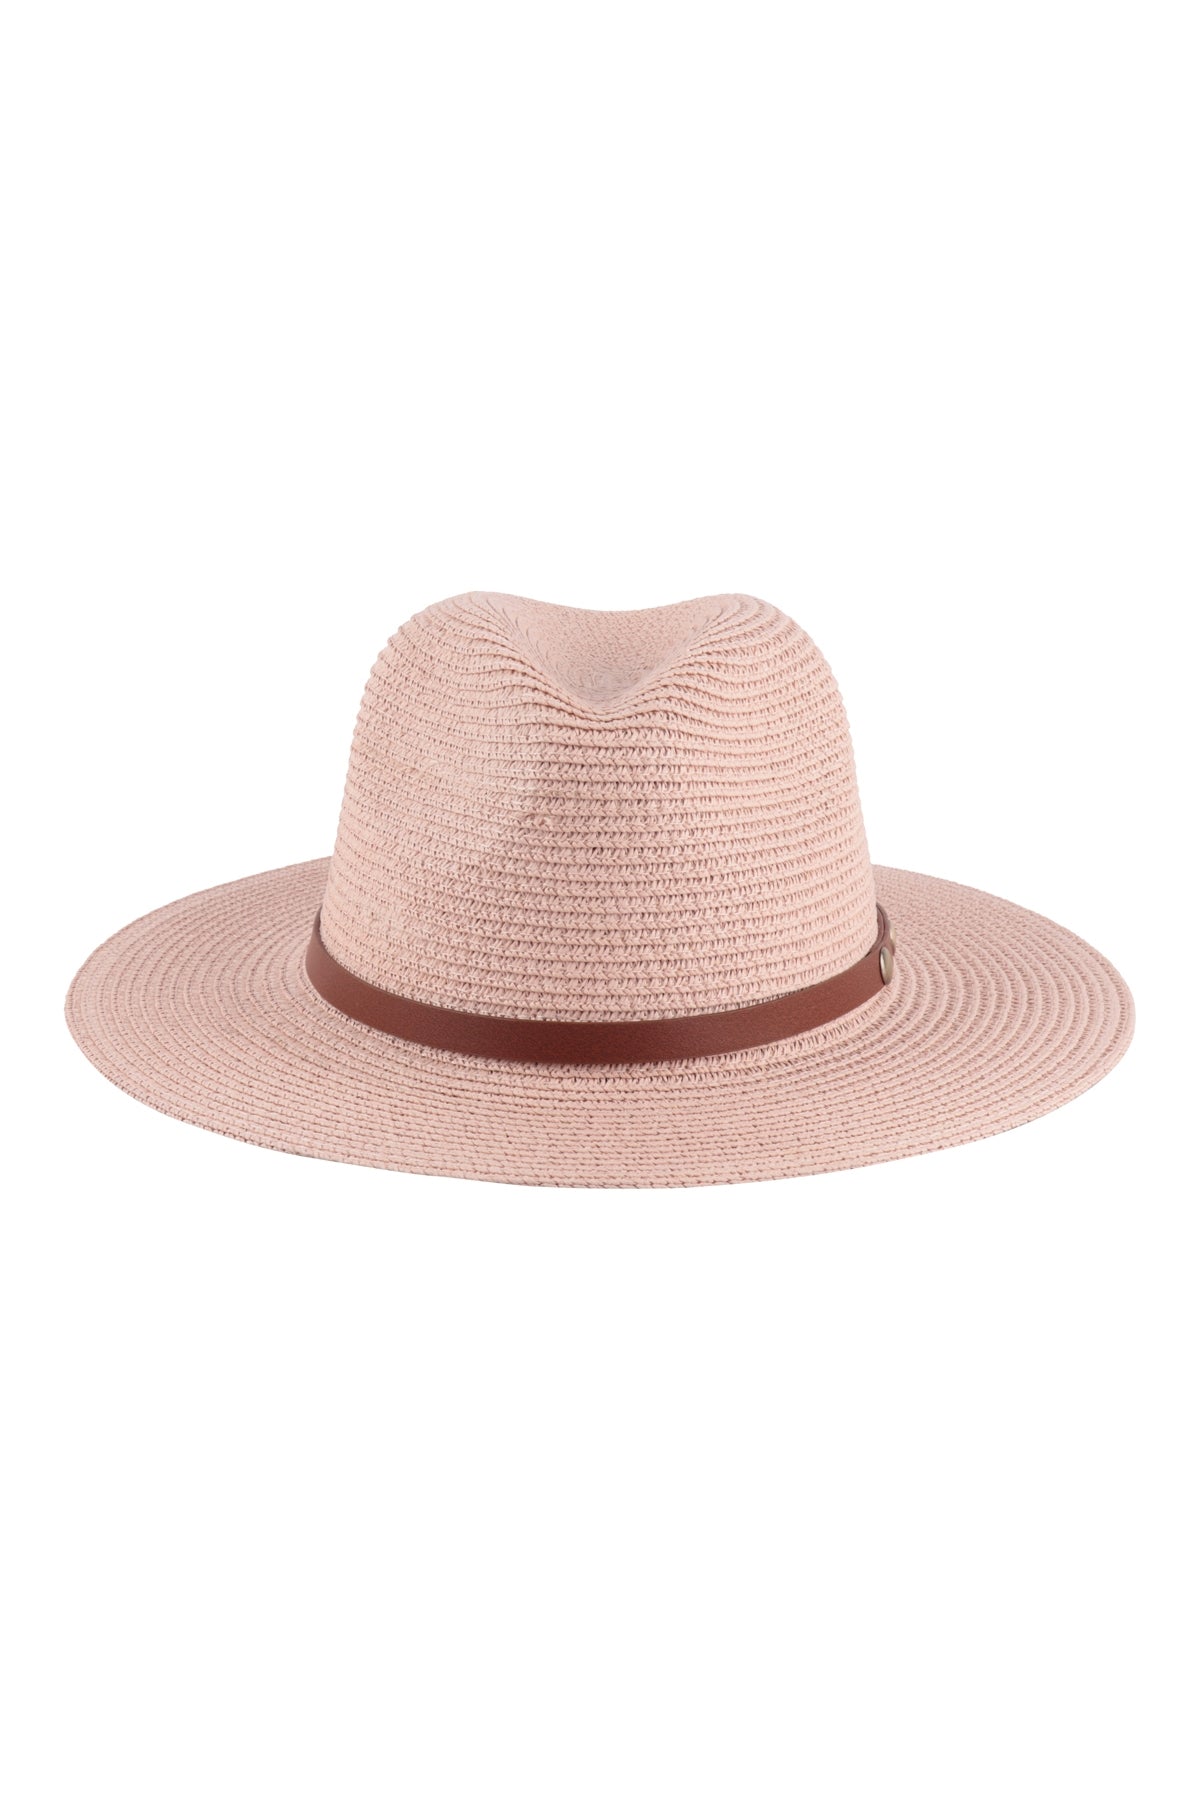 PANAMA BRIM SUMMER HAT WITH LEATHER STRAP